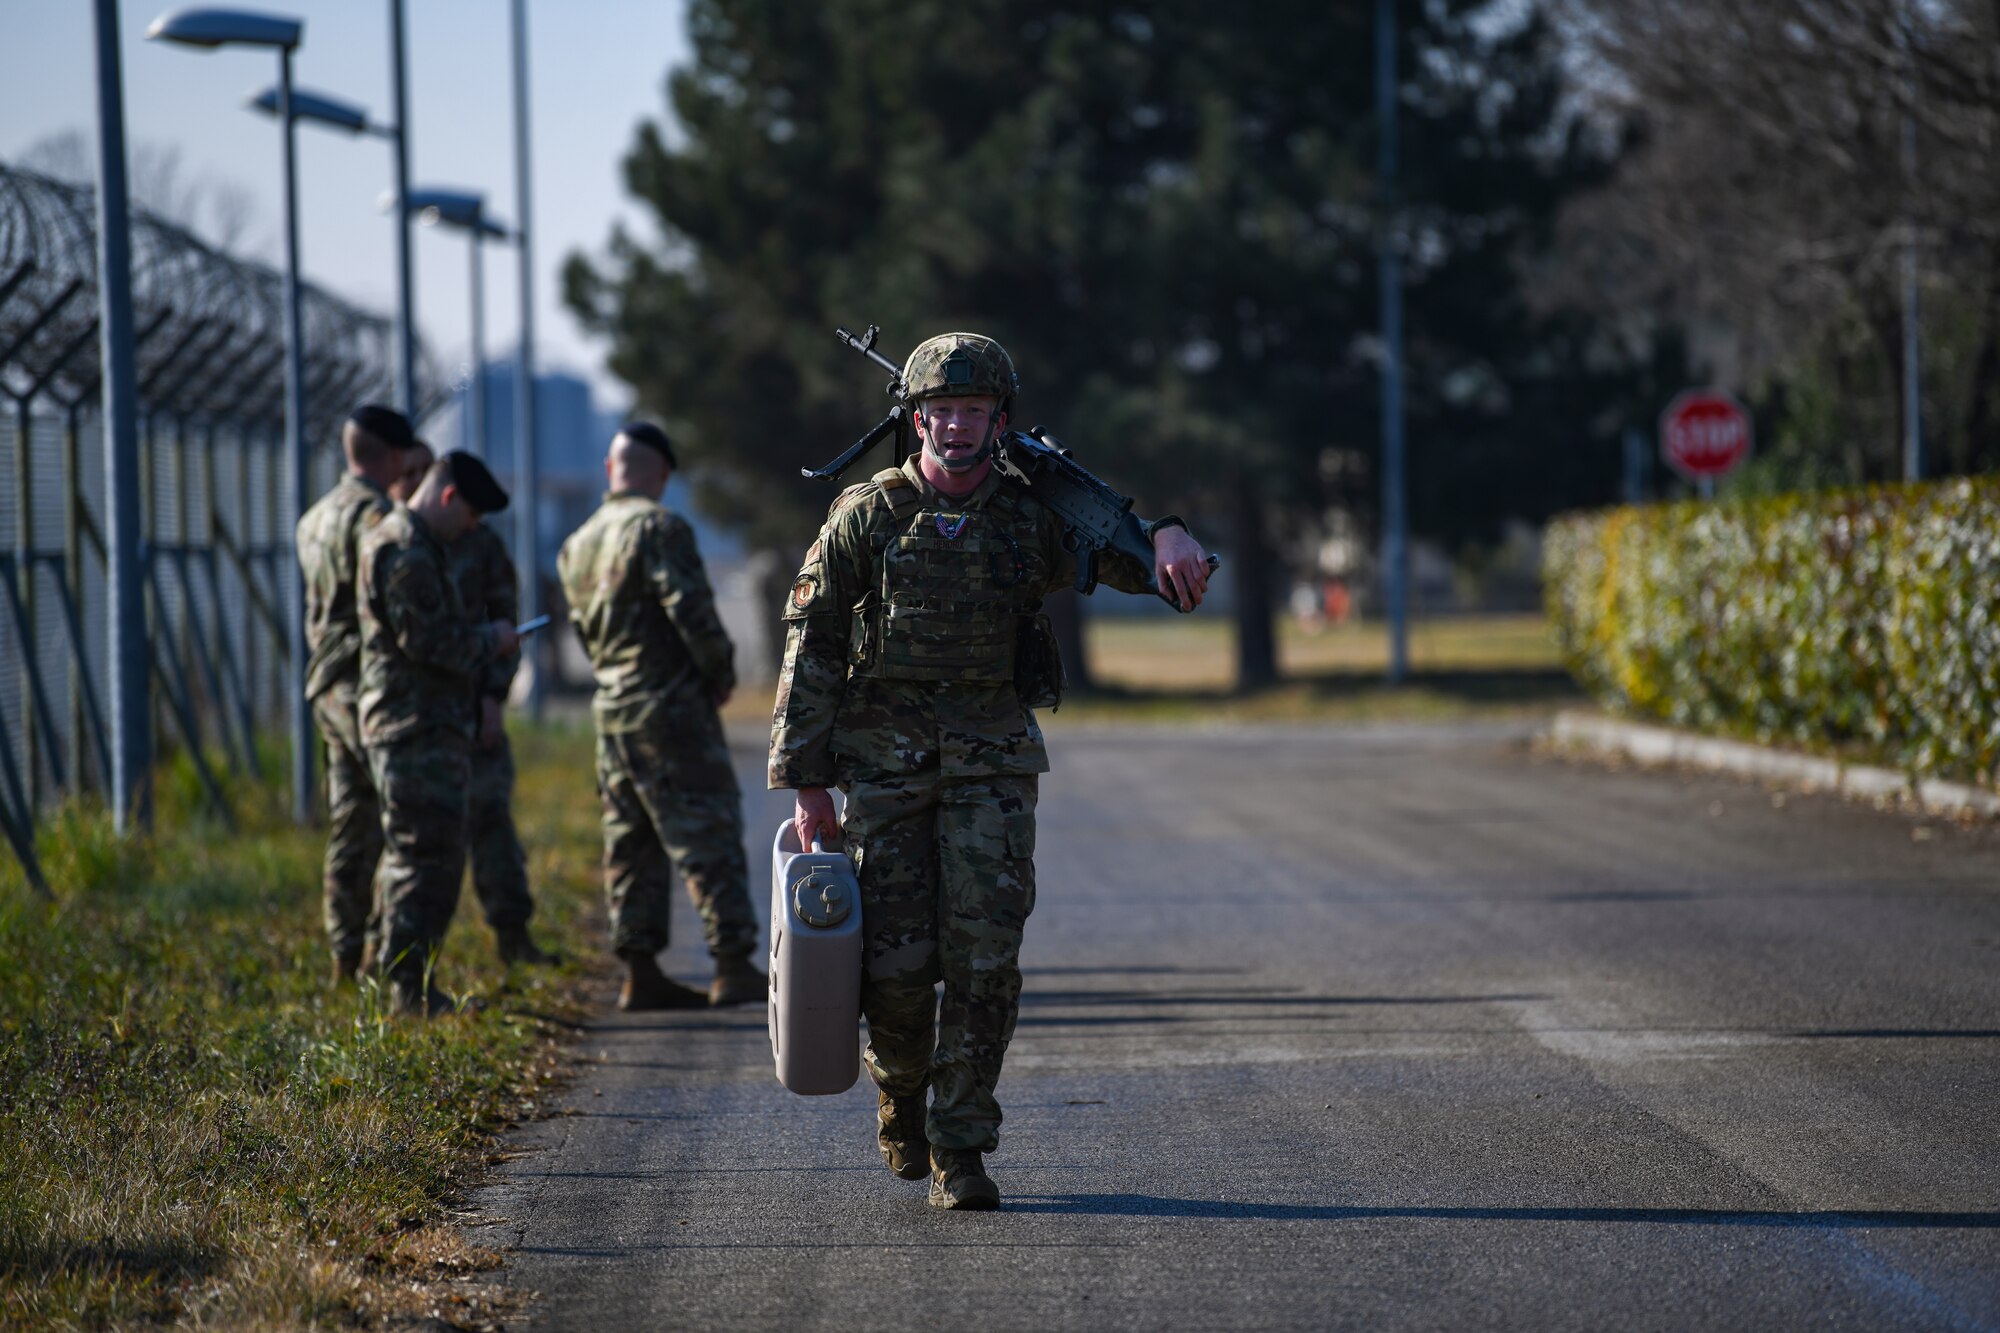 U.S. Air Force Airman 1st Class Hunter B. Hendrix, 31st Security Forces Squadron member, carries one jerry can, and an M240 machine gun at Aviano Air Base, Italy, Feb. 14, 2020. Airmen participated in a 400 meter equipment carry during the three day Defender Challenge. (U.S. Air Force photo by Airman 1st Class Ericka A. Woolever)